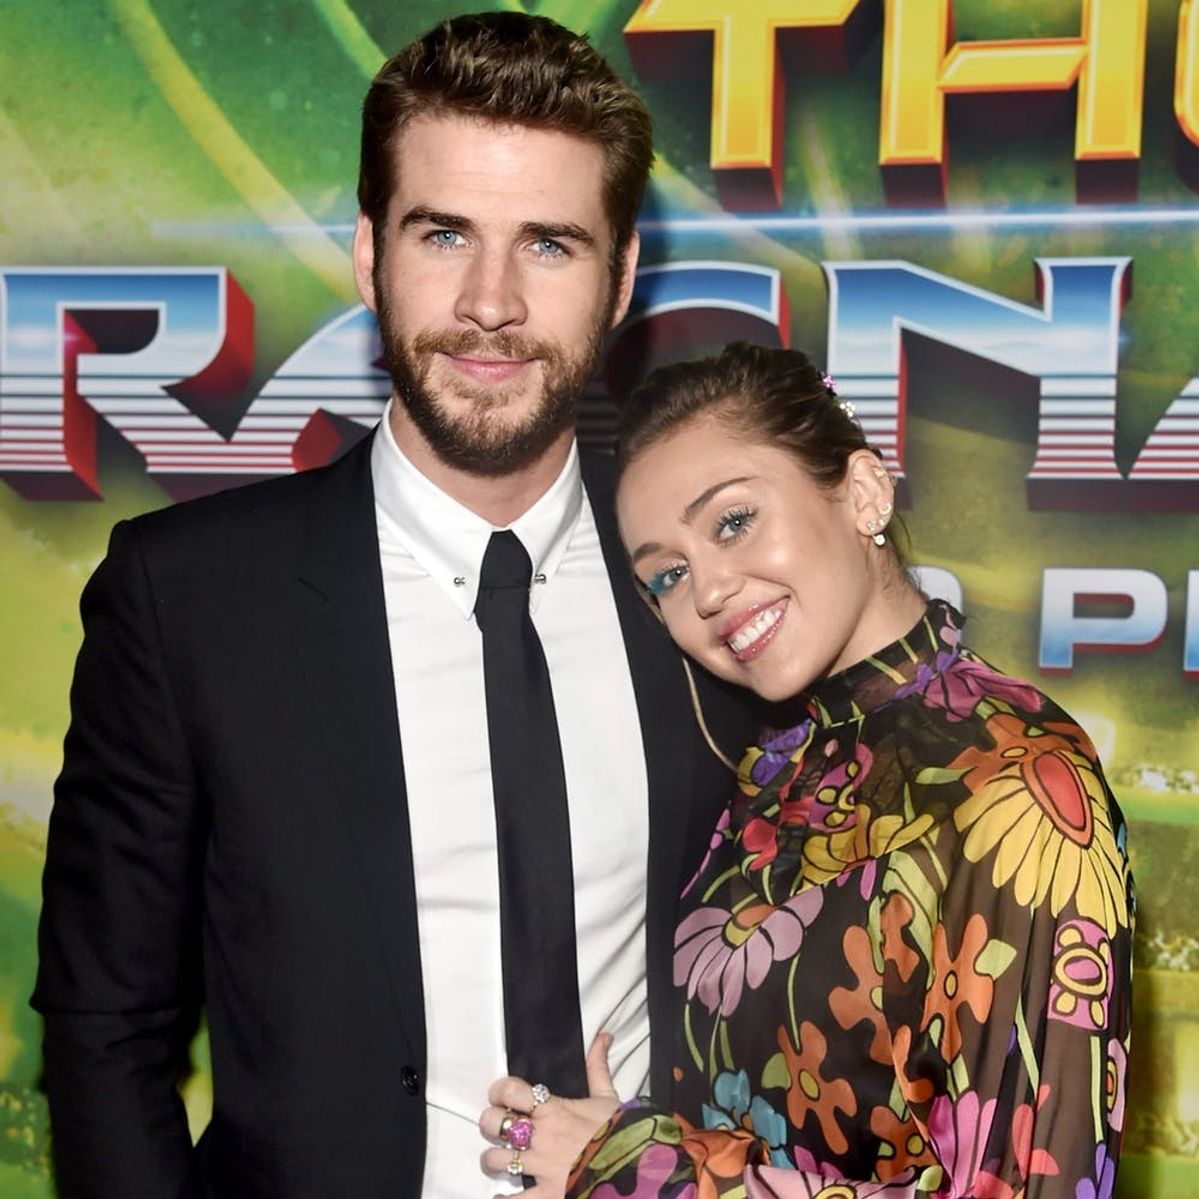 Miley Cyrus and Liam Hemsworth Walked Their First Red Carpet Together in Four Years